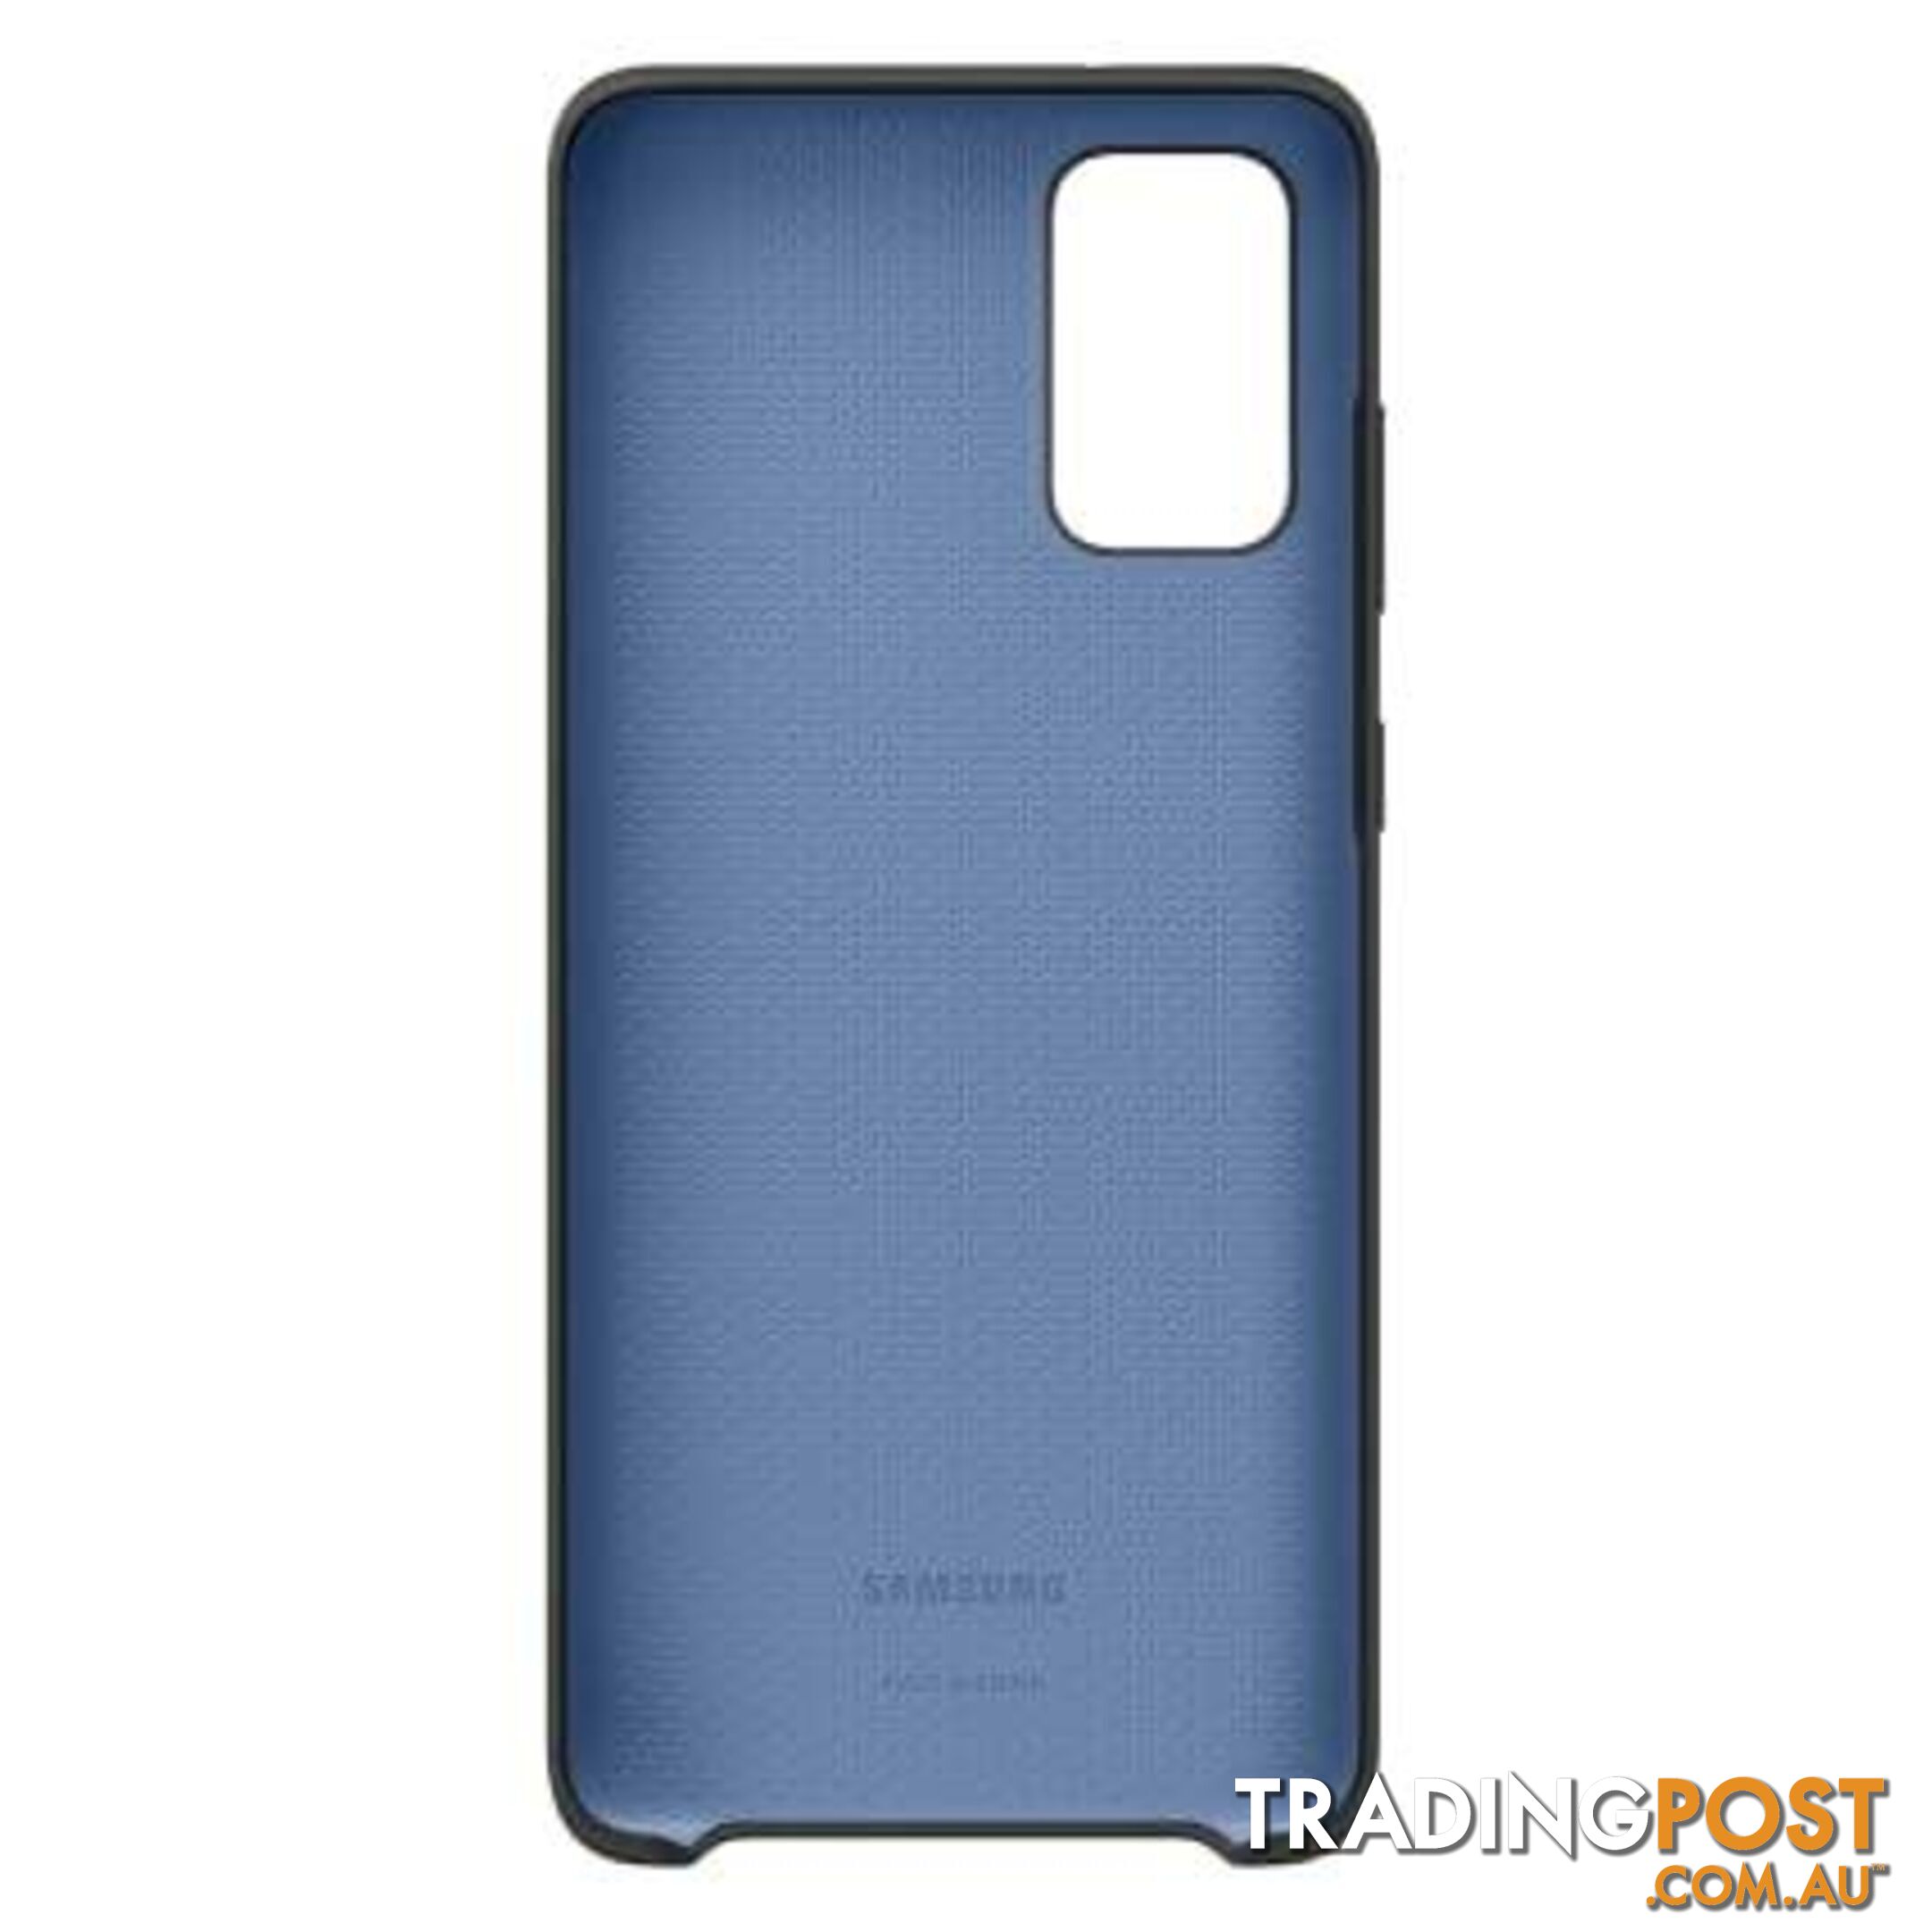 Samsung Silicone Cover For Samsung Galaxy S20+ - Samsung - 8806090226151